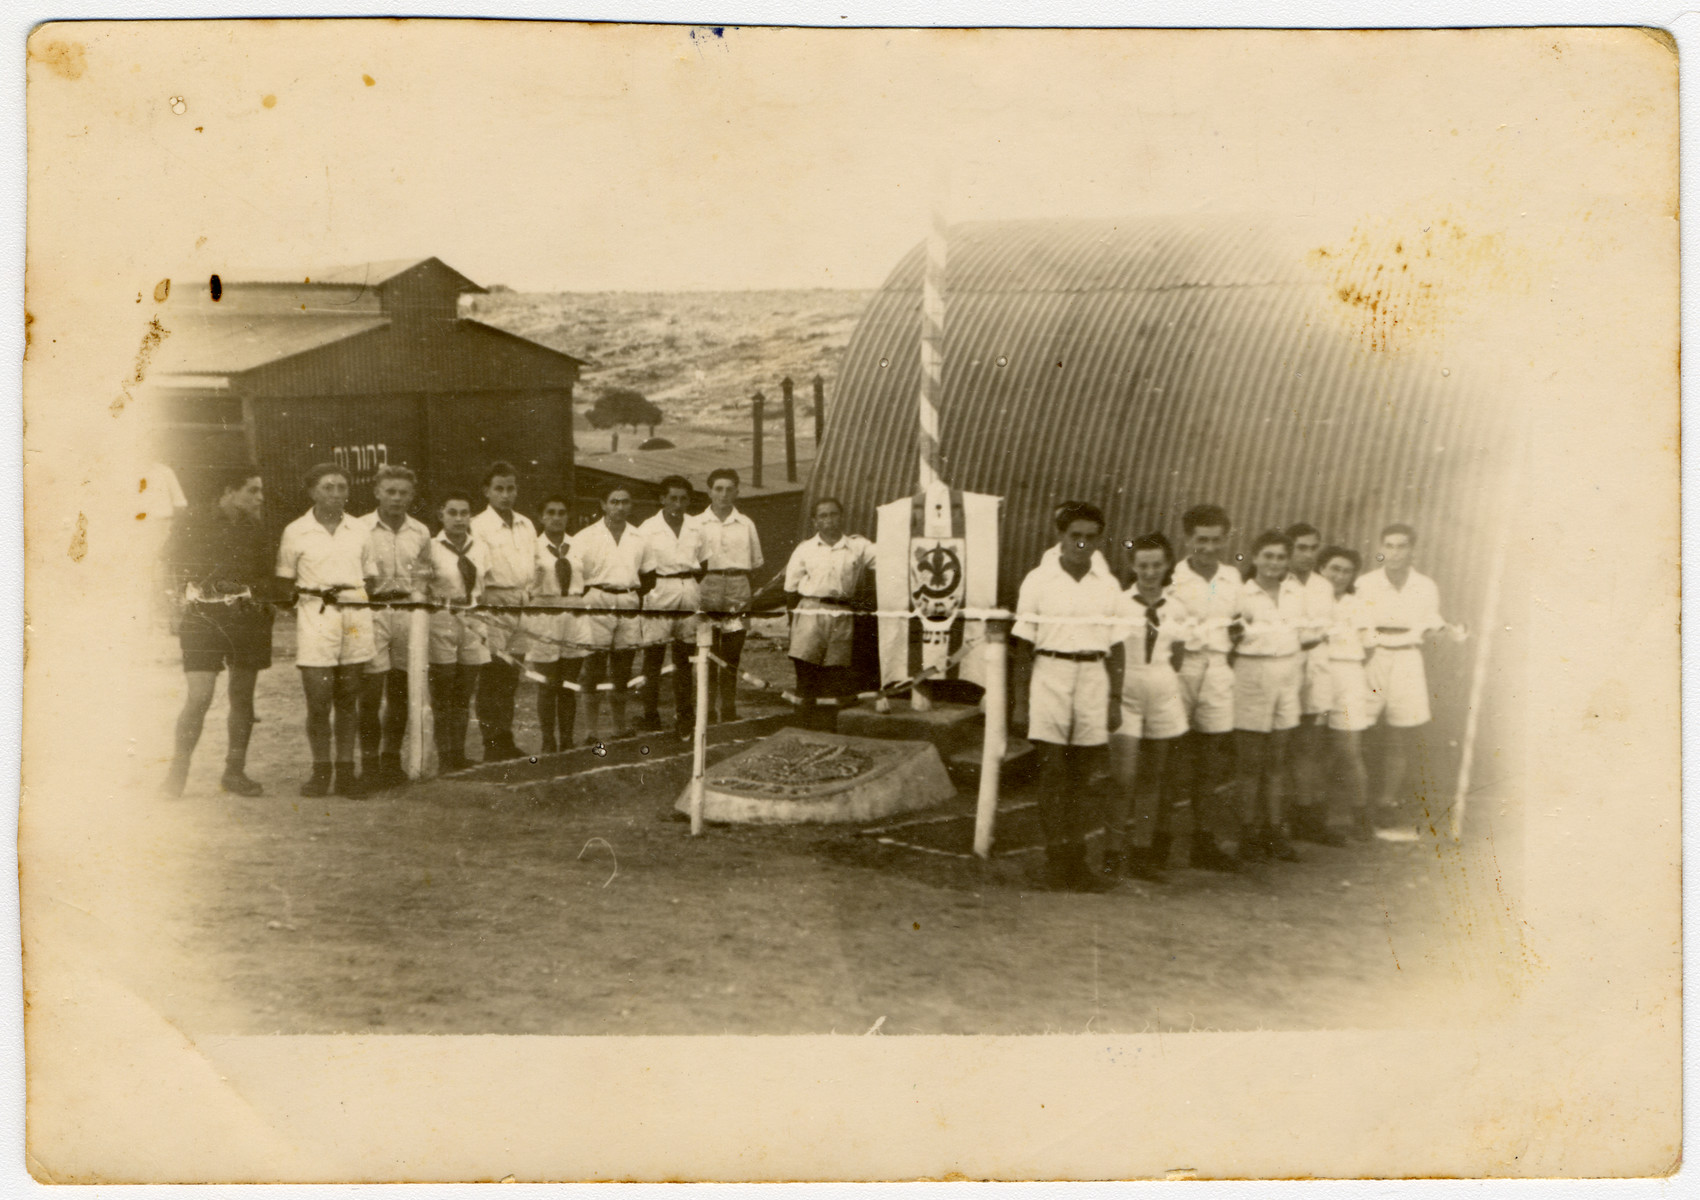 Group portrait of members of Gordonia Zionist Youth movement standing next to a flag pole in the Cyprus internment camp. 

Pictured second from the right is Bella  Bemocha (later Sajovic).